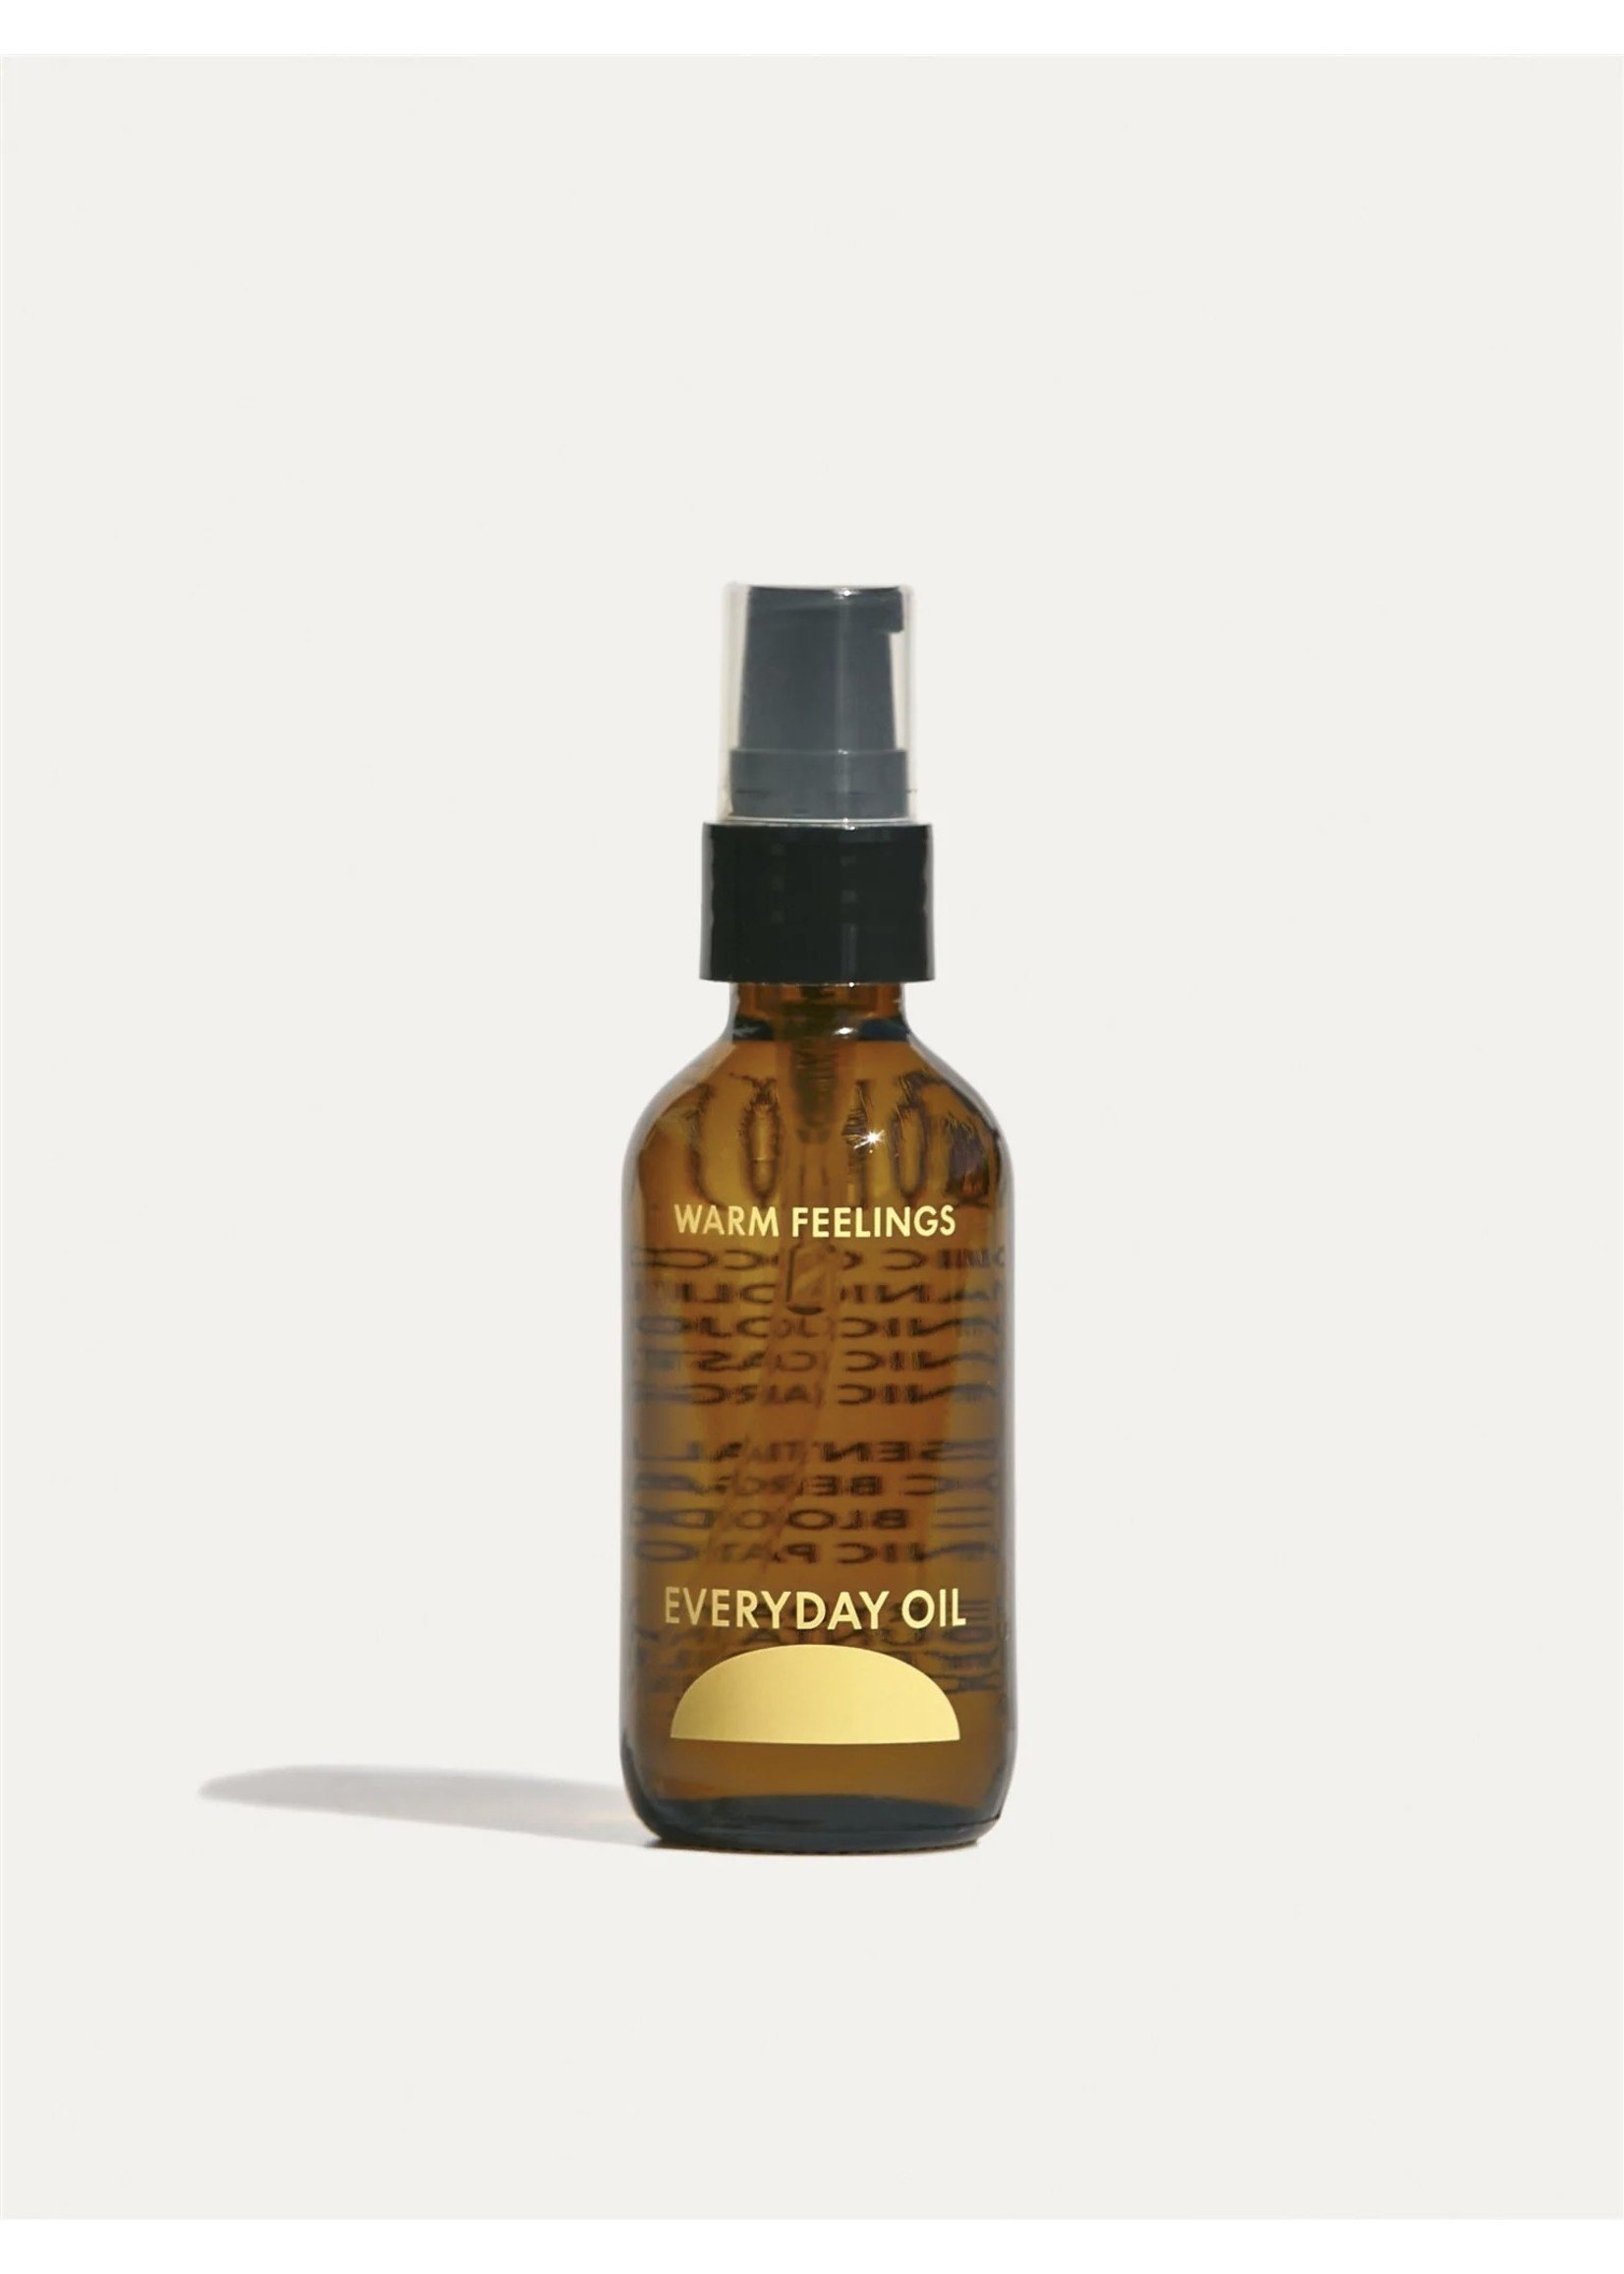 Everyday Oil 'Warm Feelings' Universal Oil by Everyday Oil